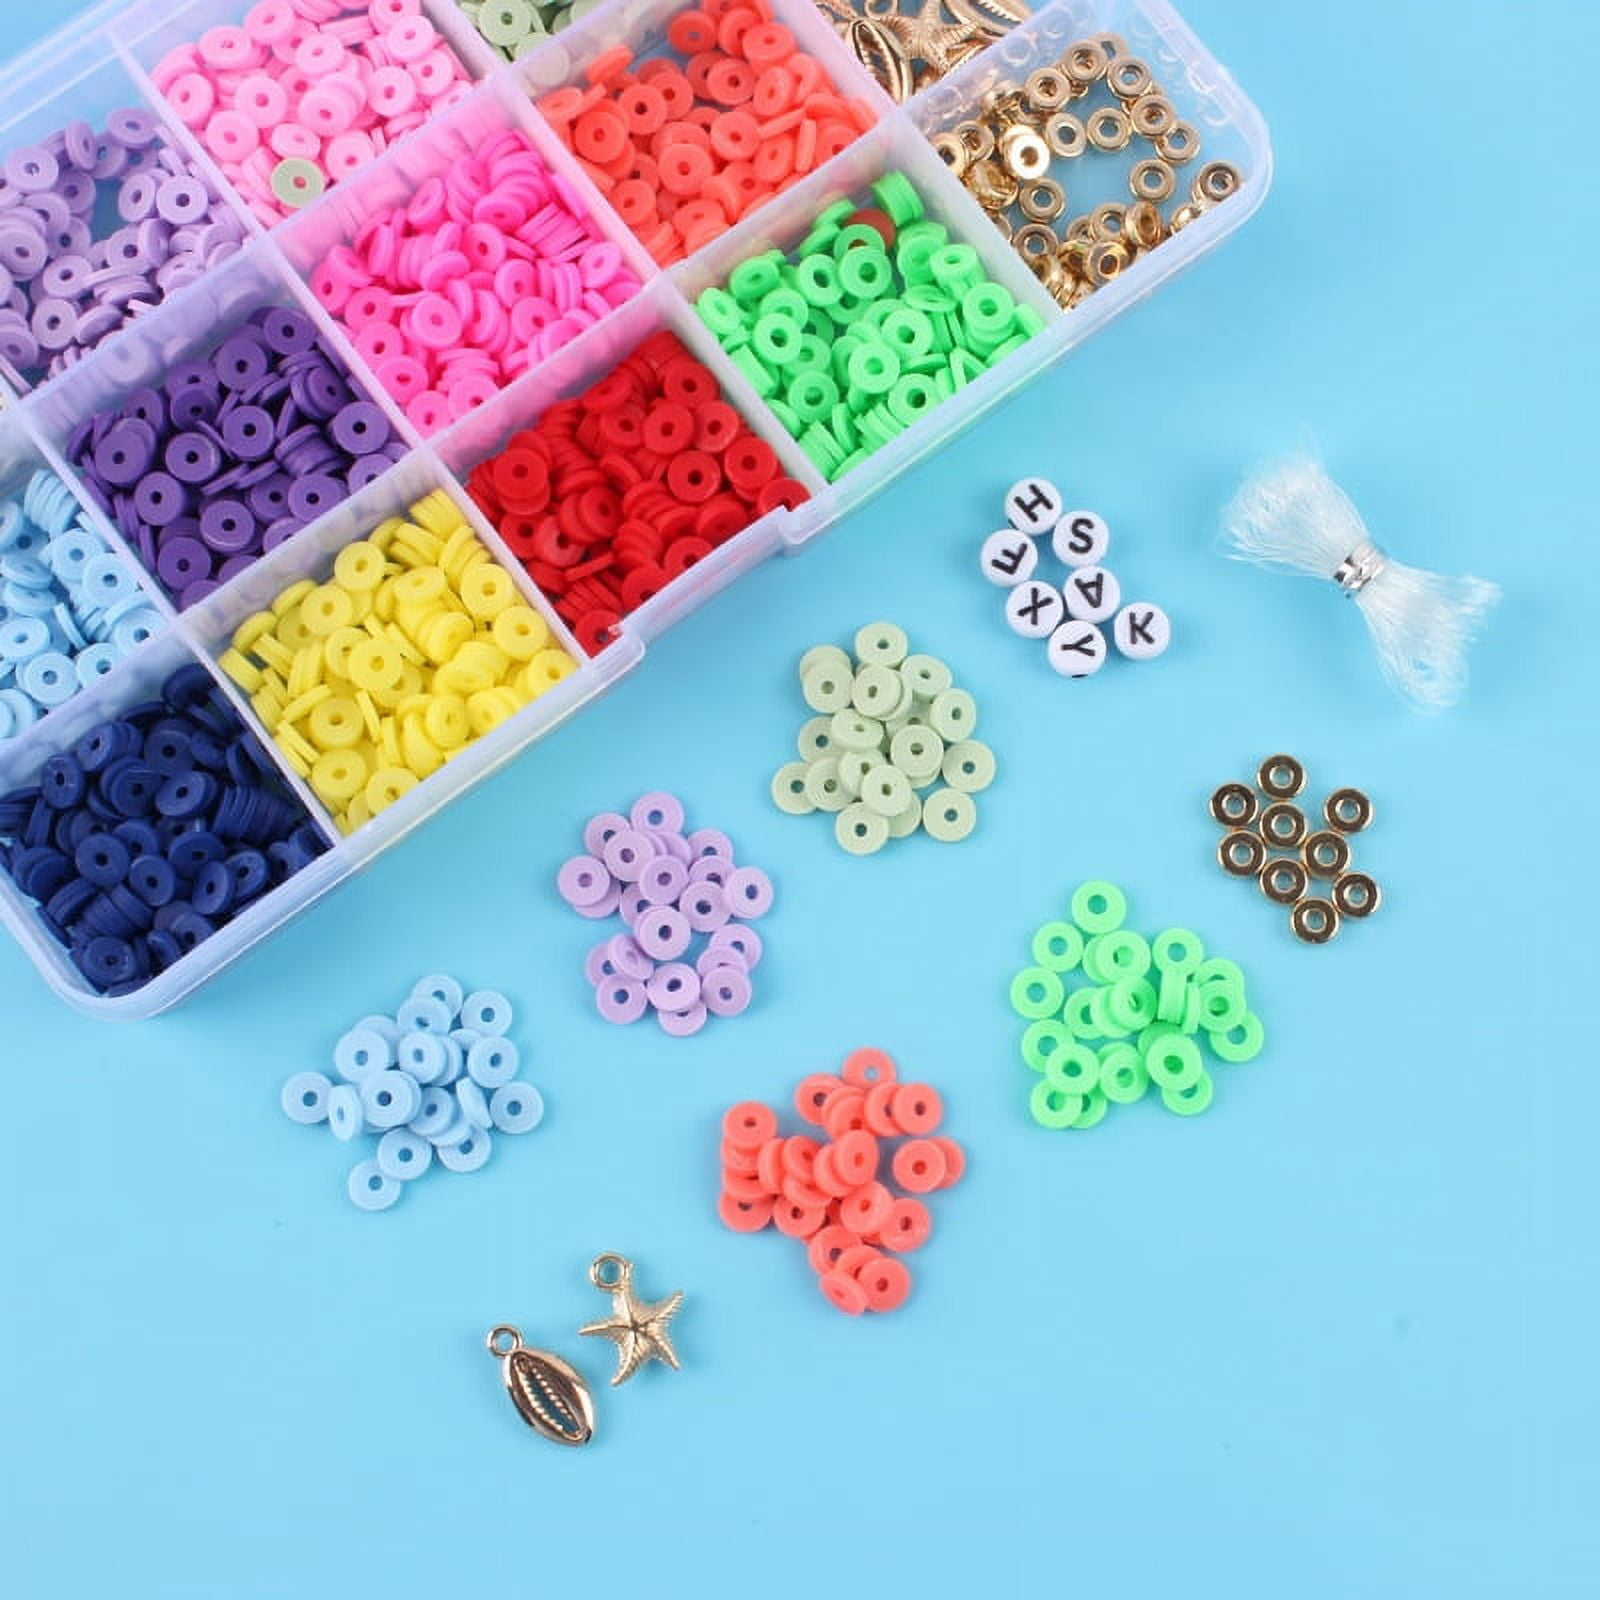 Feildoo Seed Beads Friendship Diy Bracelet Beads Craft Kit Small Rainbow  Beads For Making Jewelry Bracelet Necklace,24 Grids 3Mm Rice Bead Color  System 3 With Accessories 